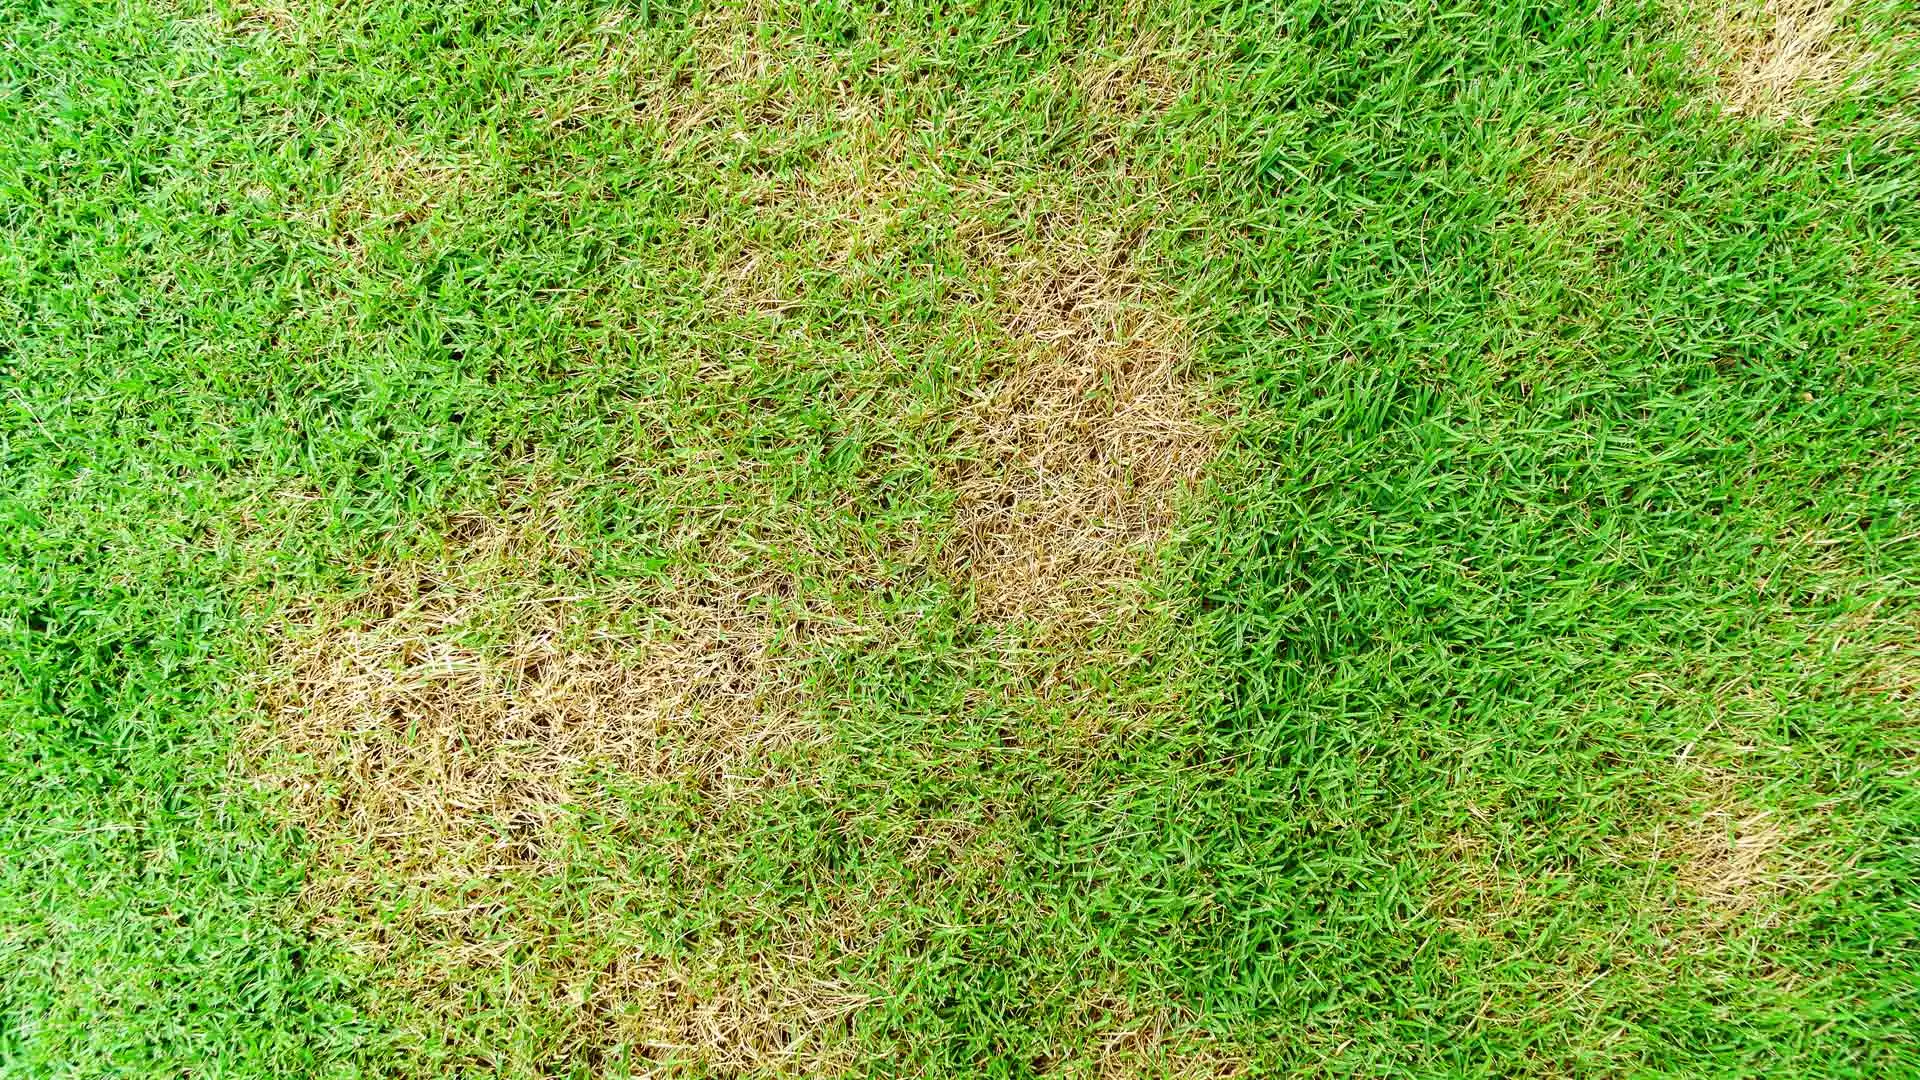 Have a Damaged Lawn? Schedule These 3 Lawn Care Services to Help It Recover